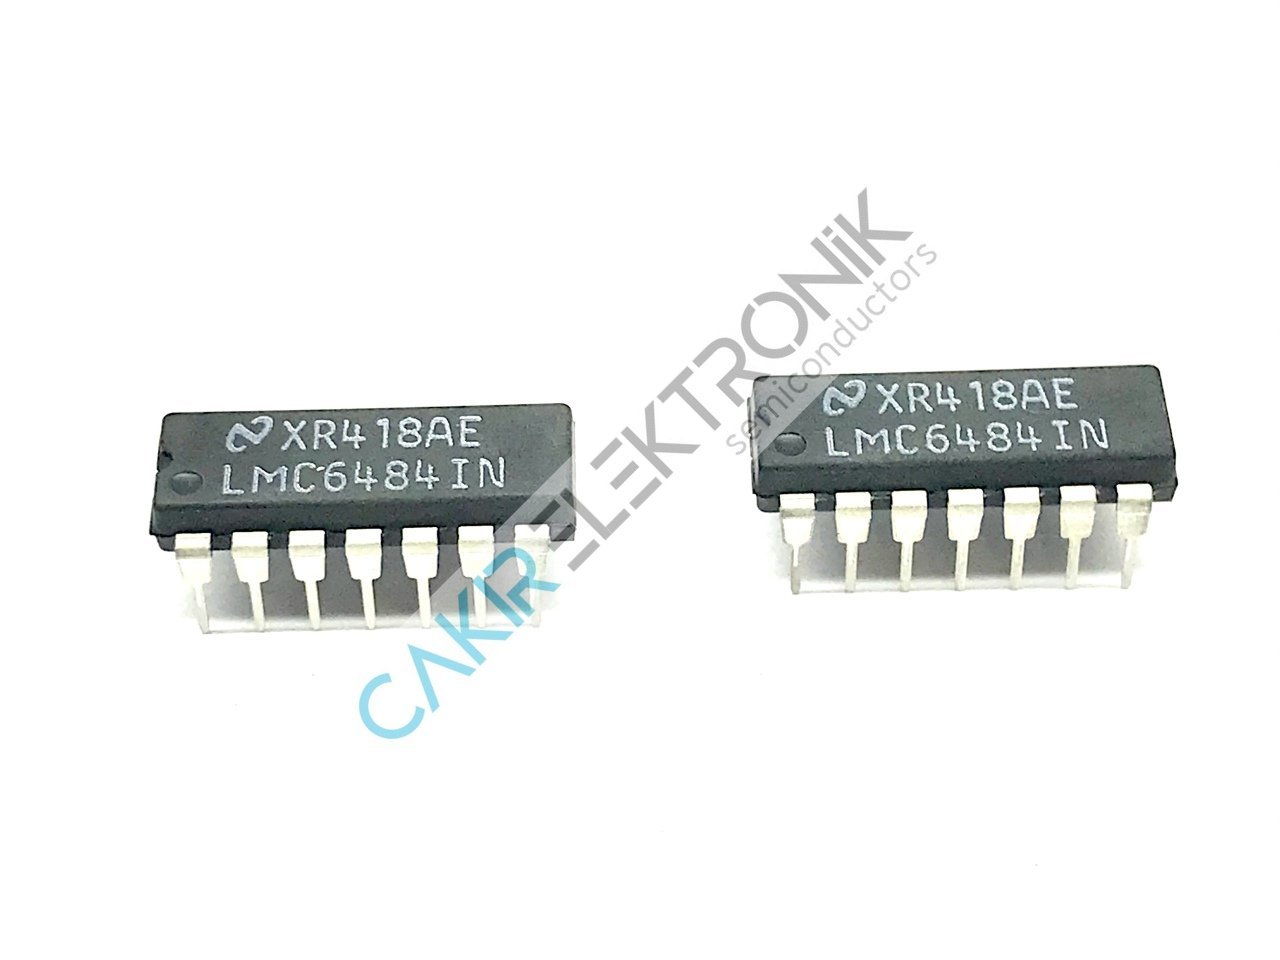 LMC6484IN- LMC6484IN - LMC6484 CMOS Quad Rail-to-Rail Input and Output Operational Amplifier